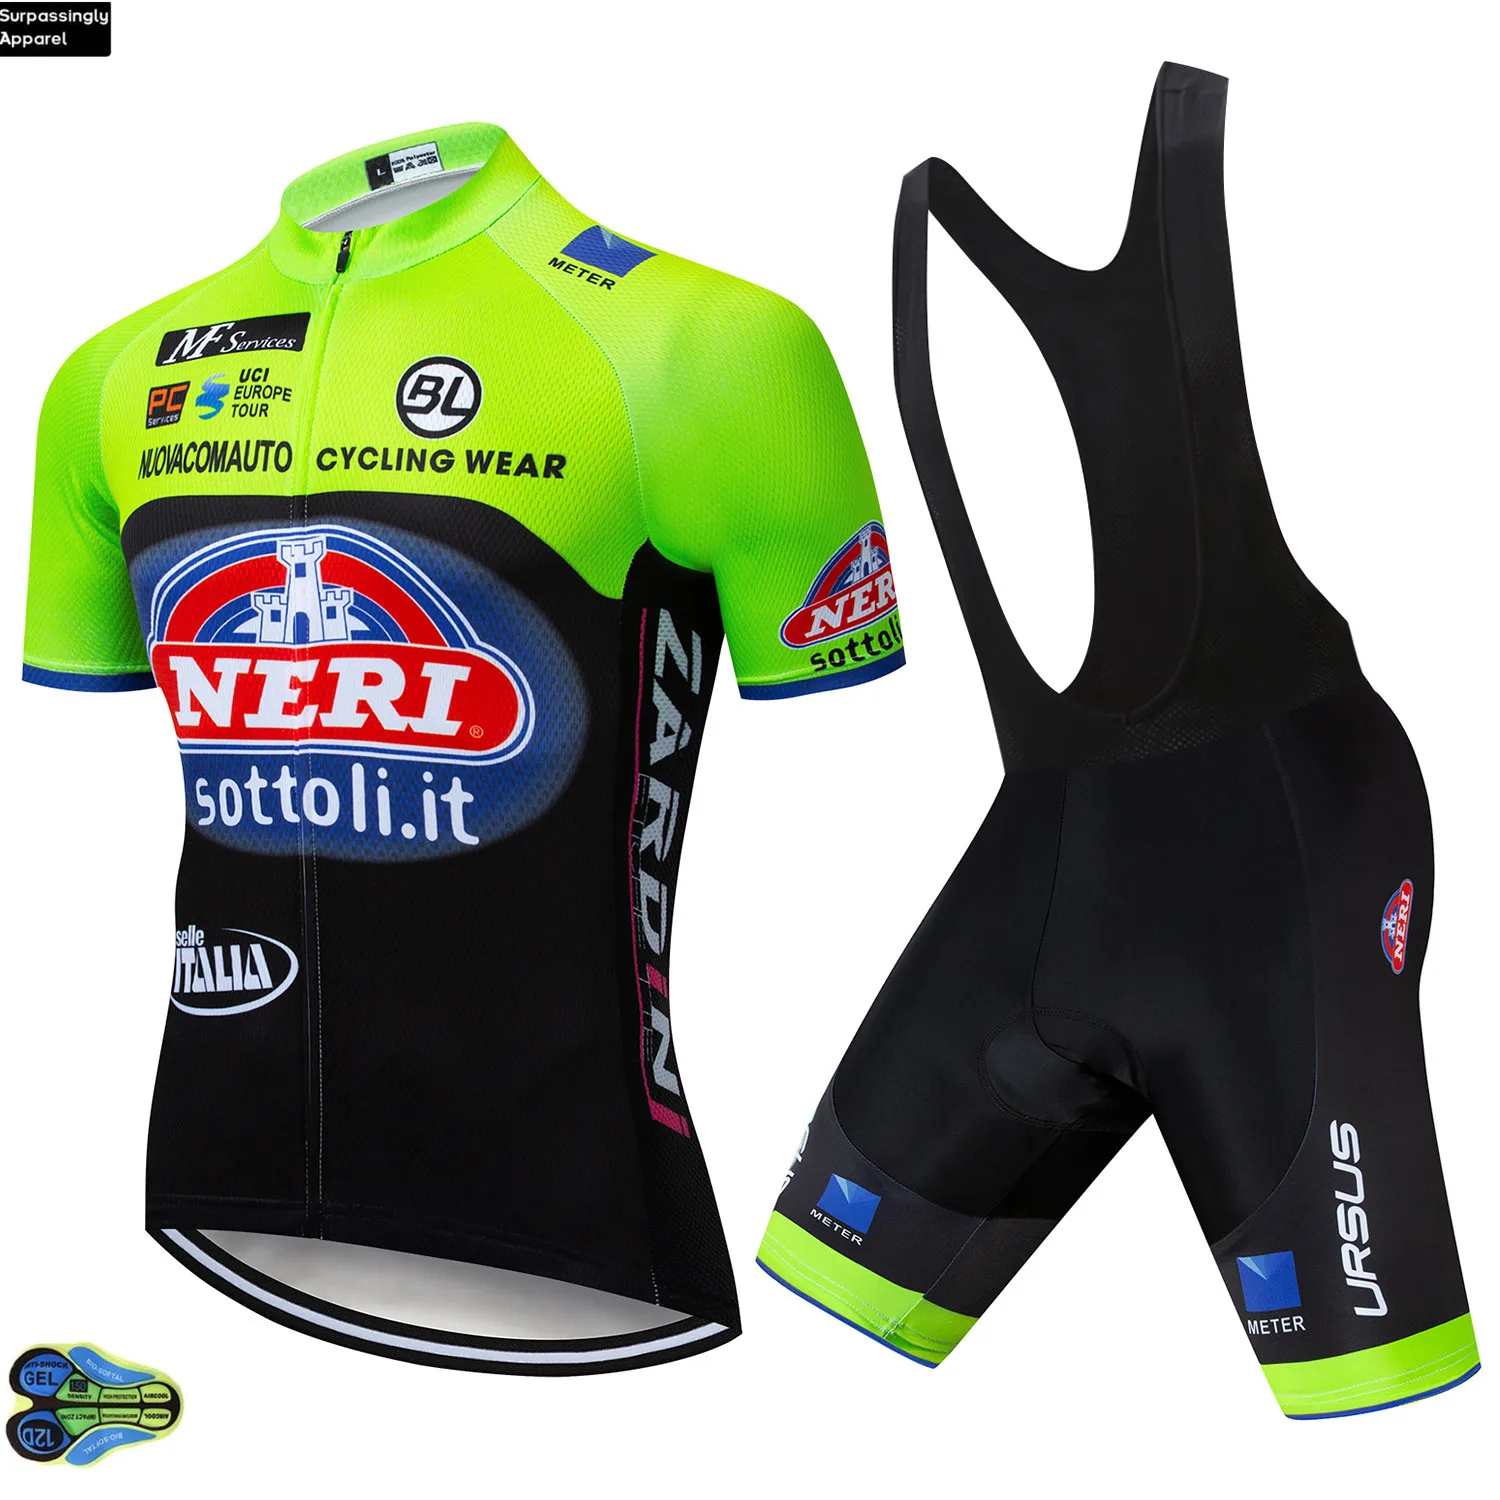 

2022 Pro Tour De Italia Bicycling Maillot Culotte Clothing Green Cycling Team Jersey 12D Gel Pads Bike Shors Set Mens Quick Dry